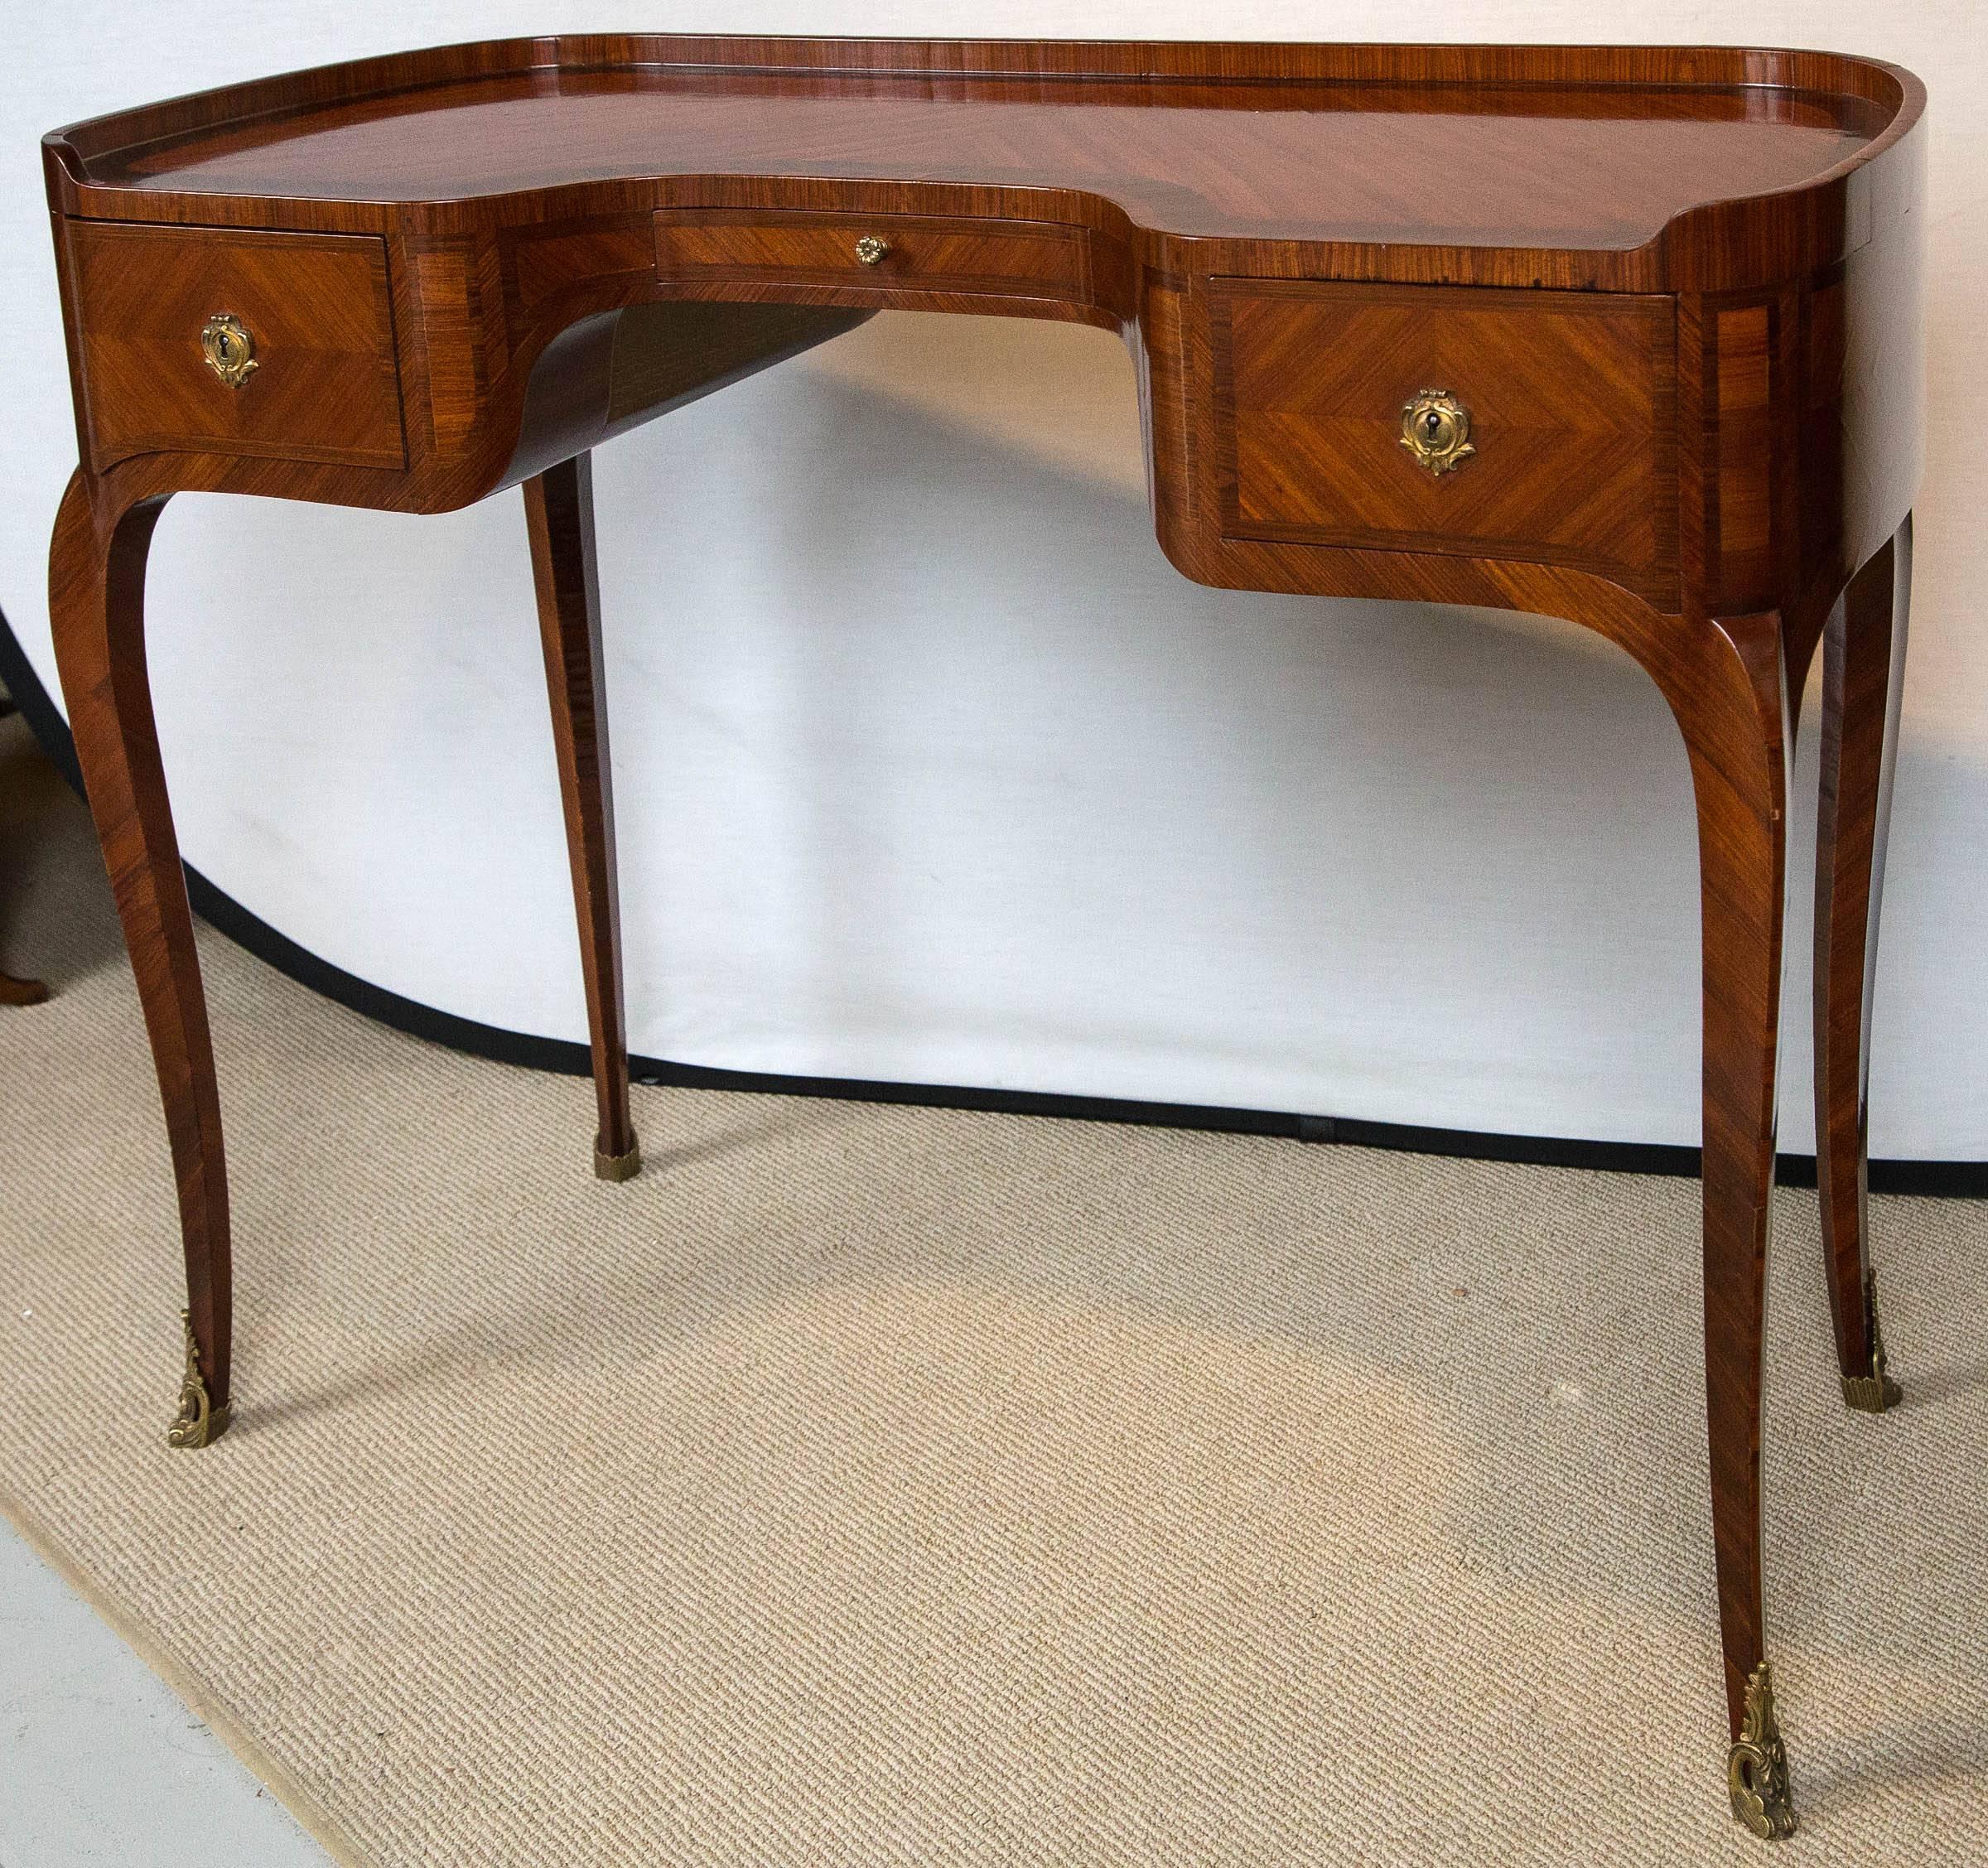 A French desk with banding, circa 1900s.